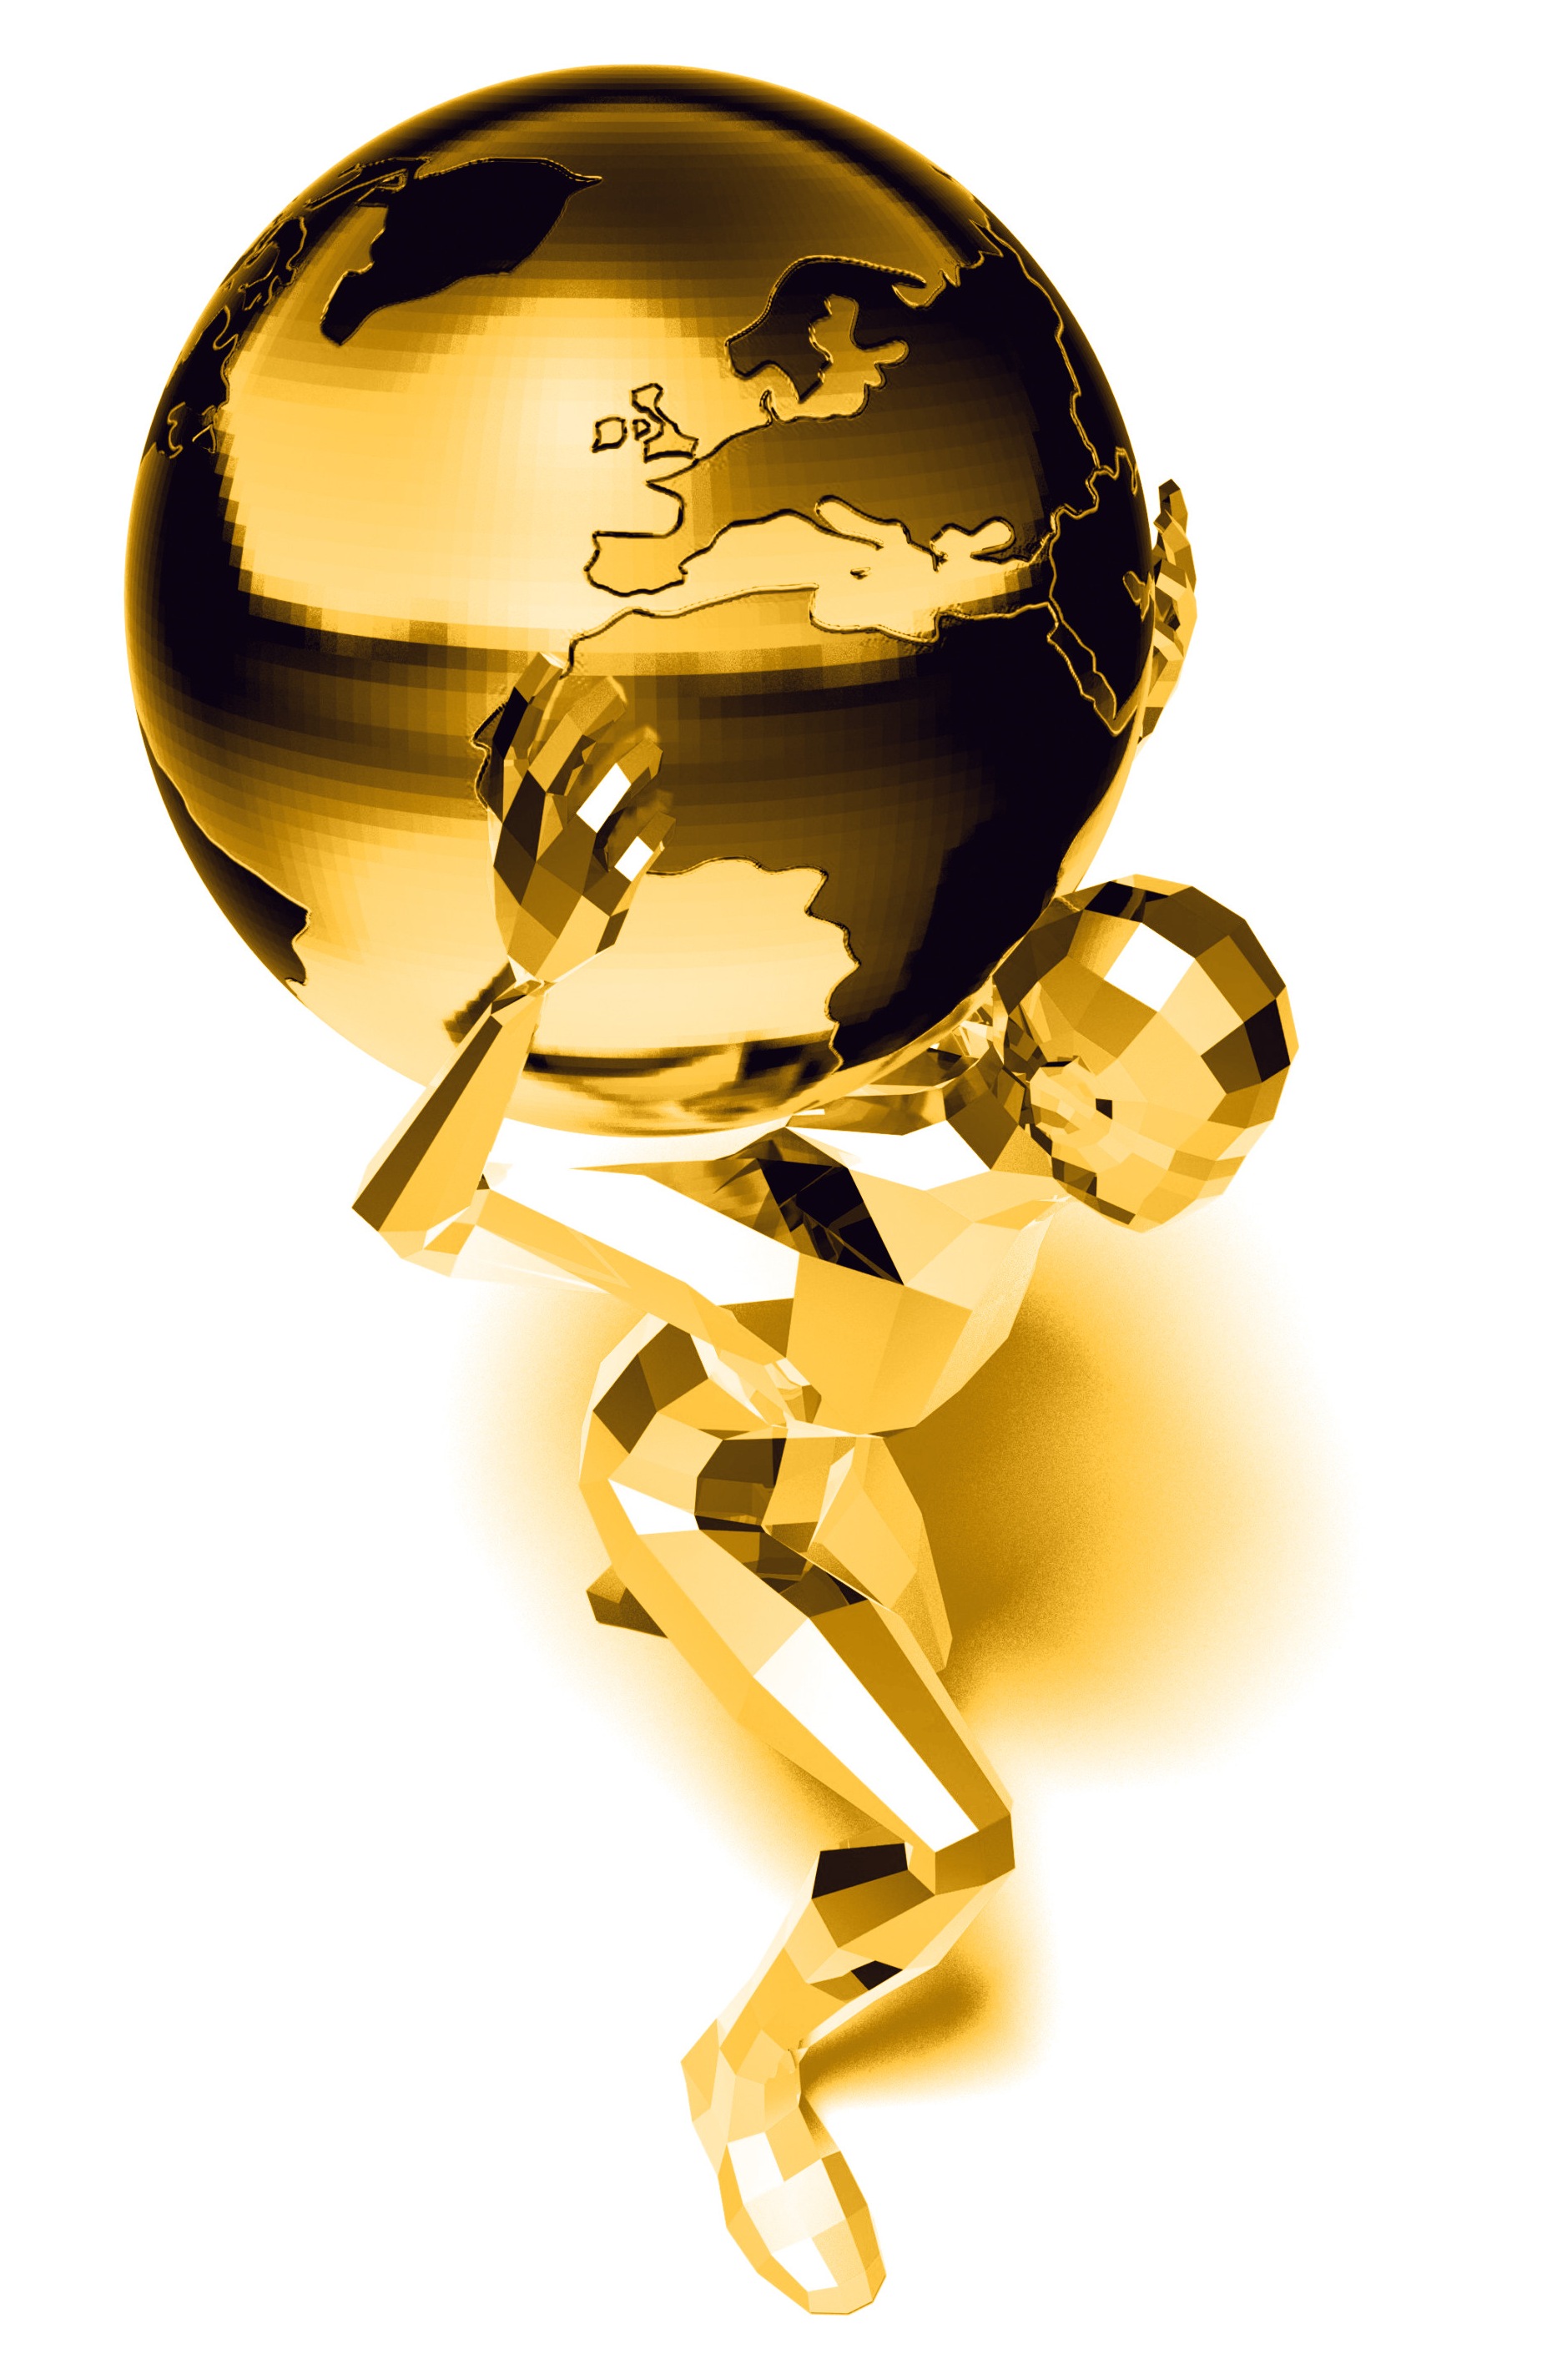 Man with the world, Abstract, Gold, Travel, Sphere, HQ Photo